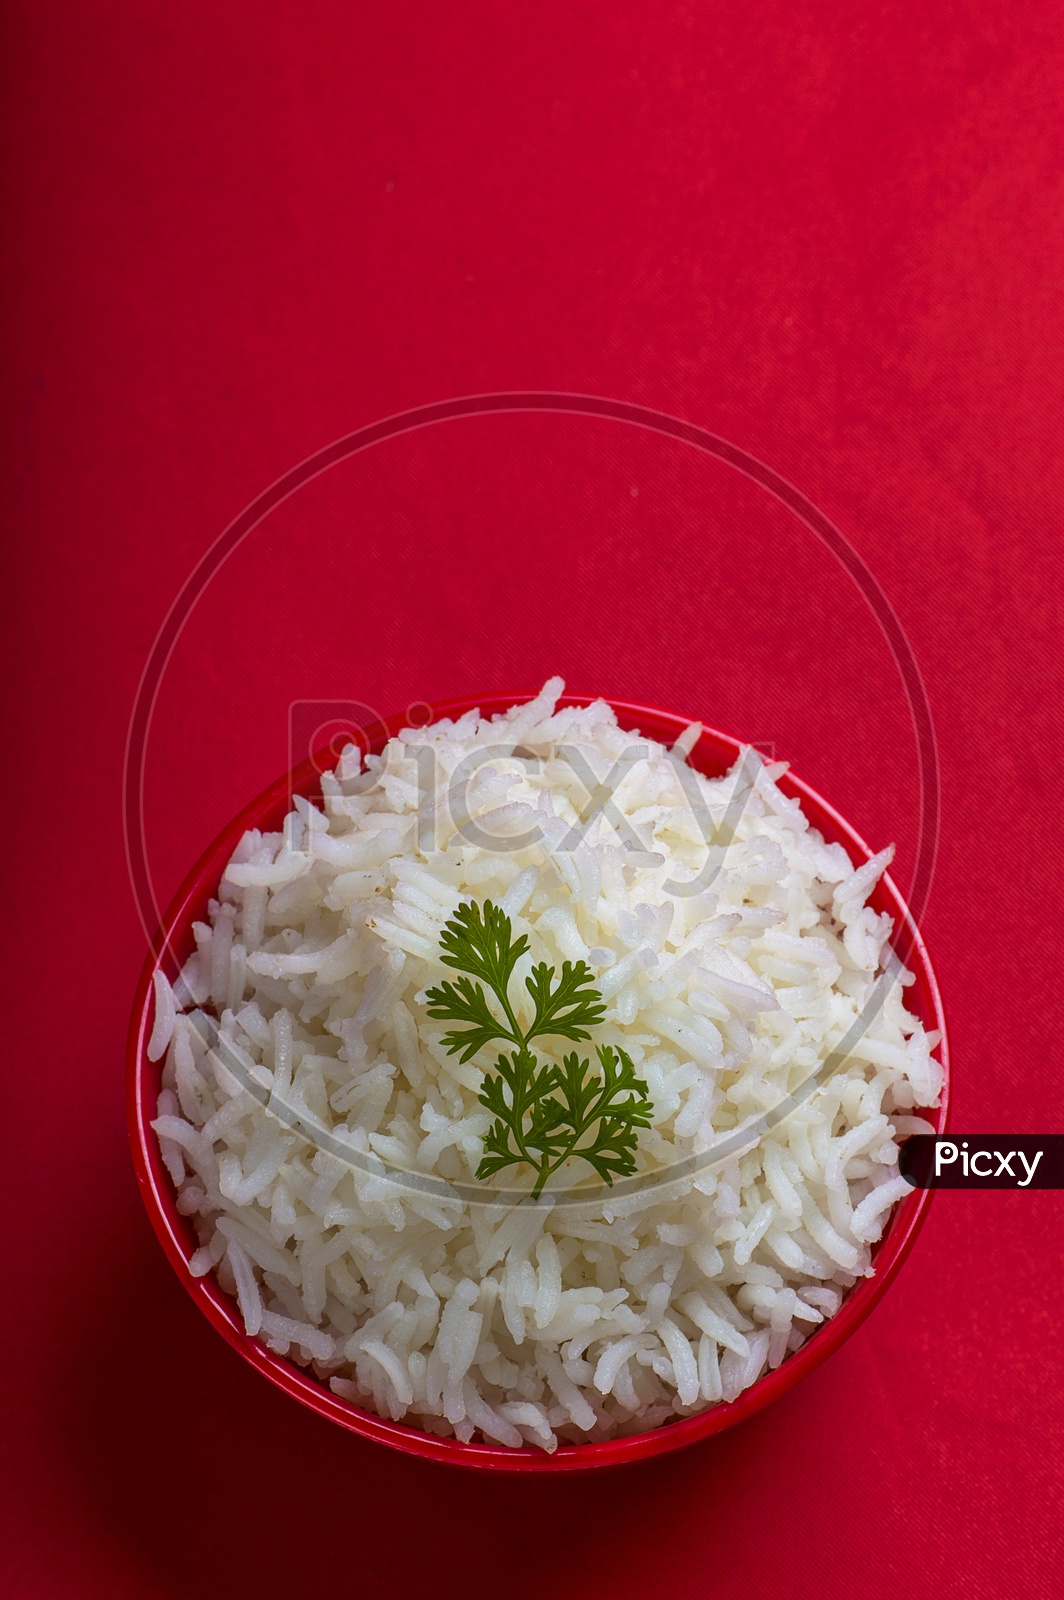 Cooked plain white basmati rice in a red bowl on red background